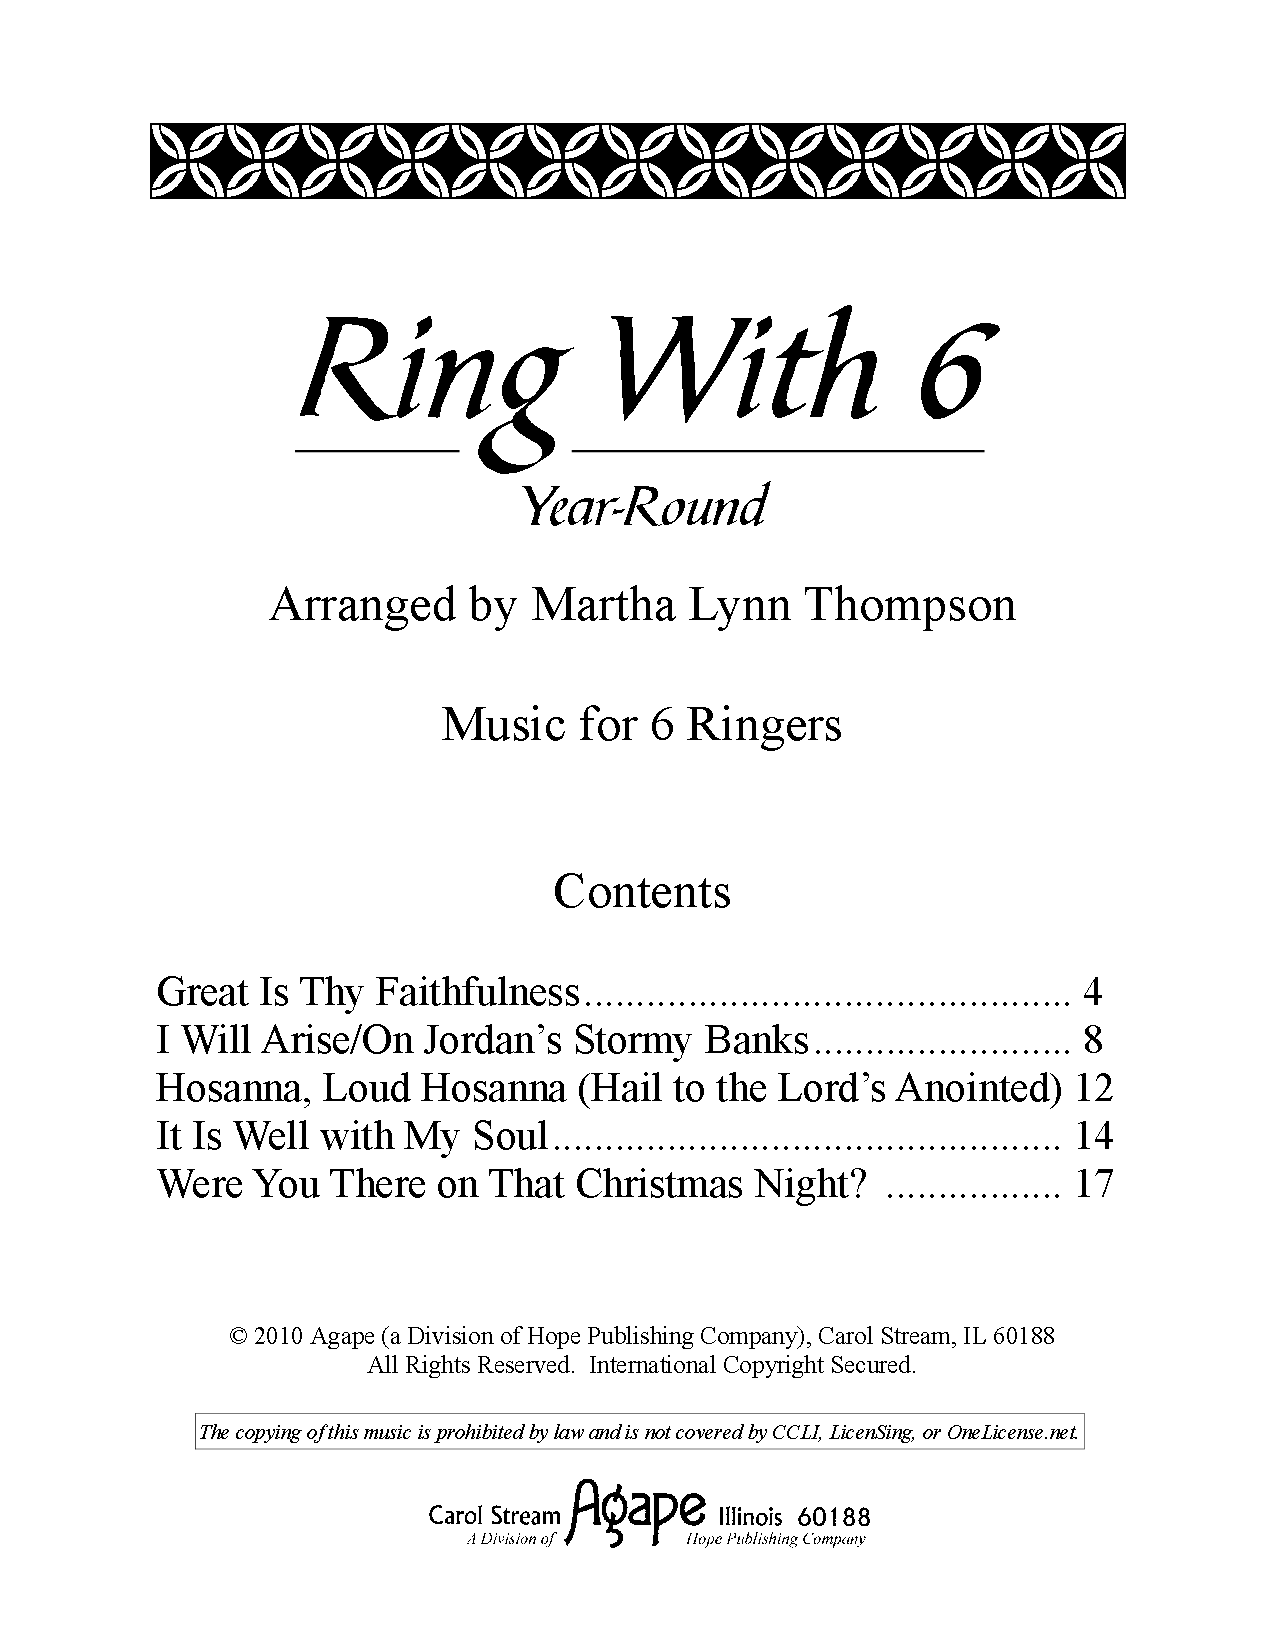 Ring With 6: Year-Round